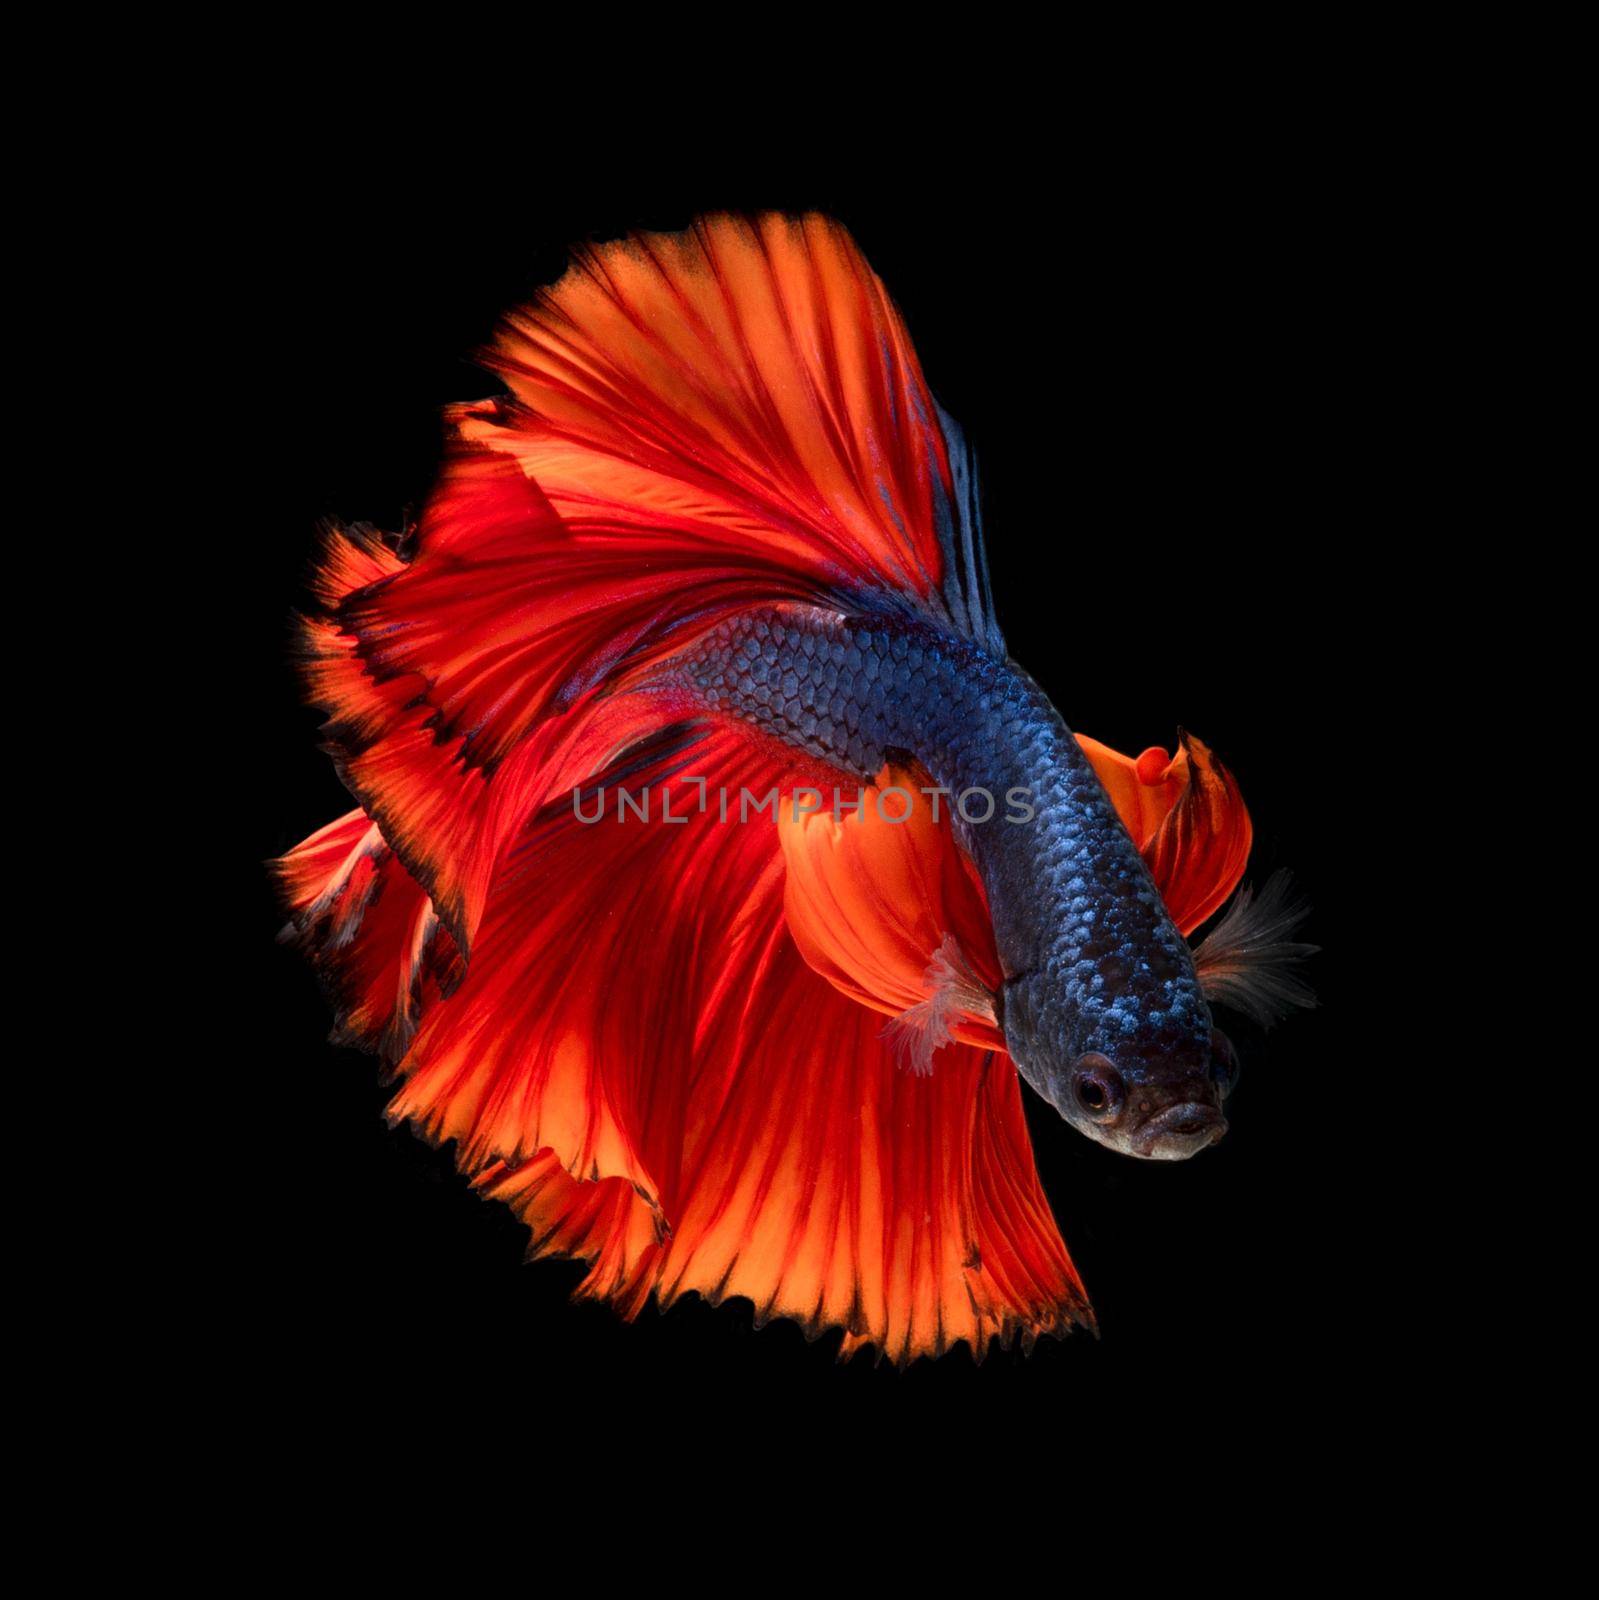 Colourful Betta fish,Siamese fighting fish in movement isolated on black background by Nuamfolio